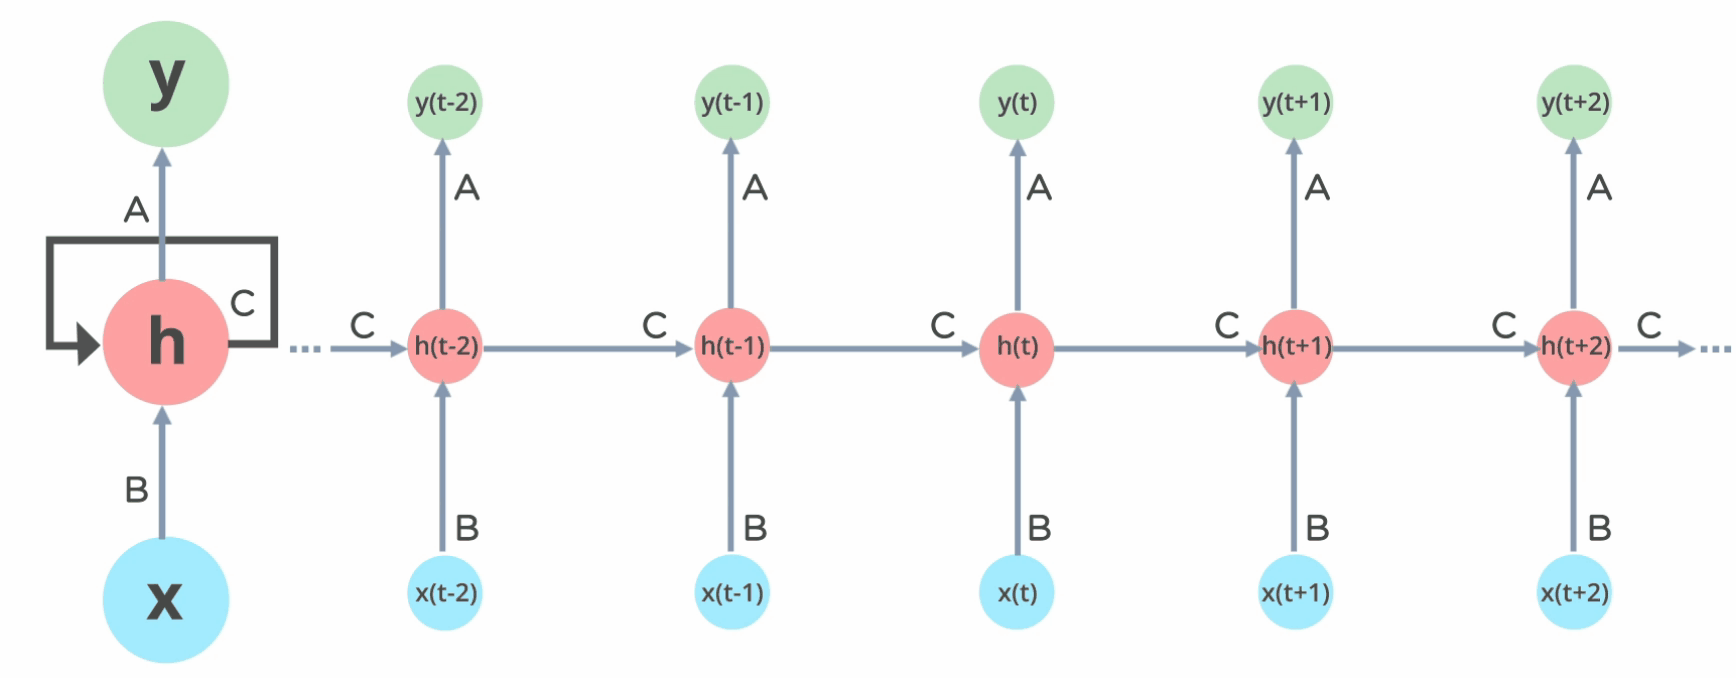 Fully_connected_Recurrent_Neural_Network